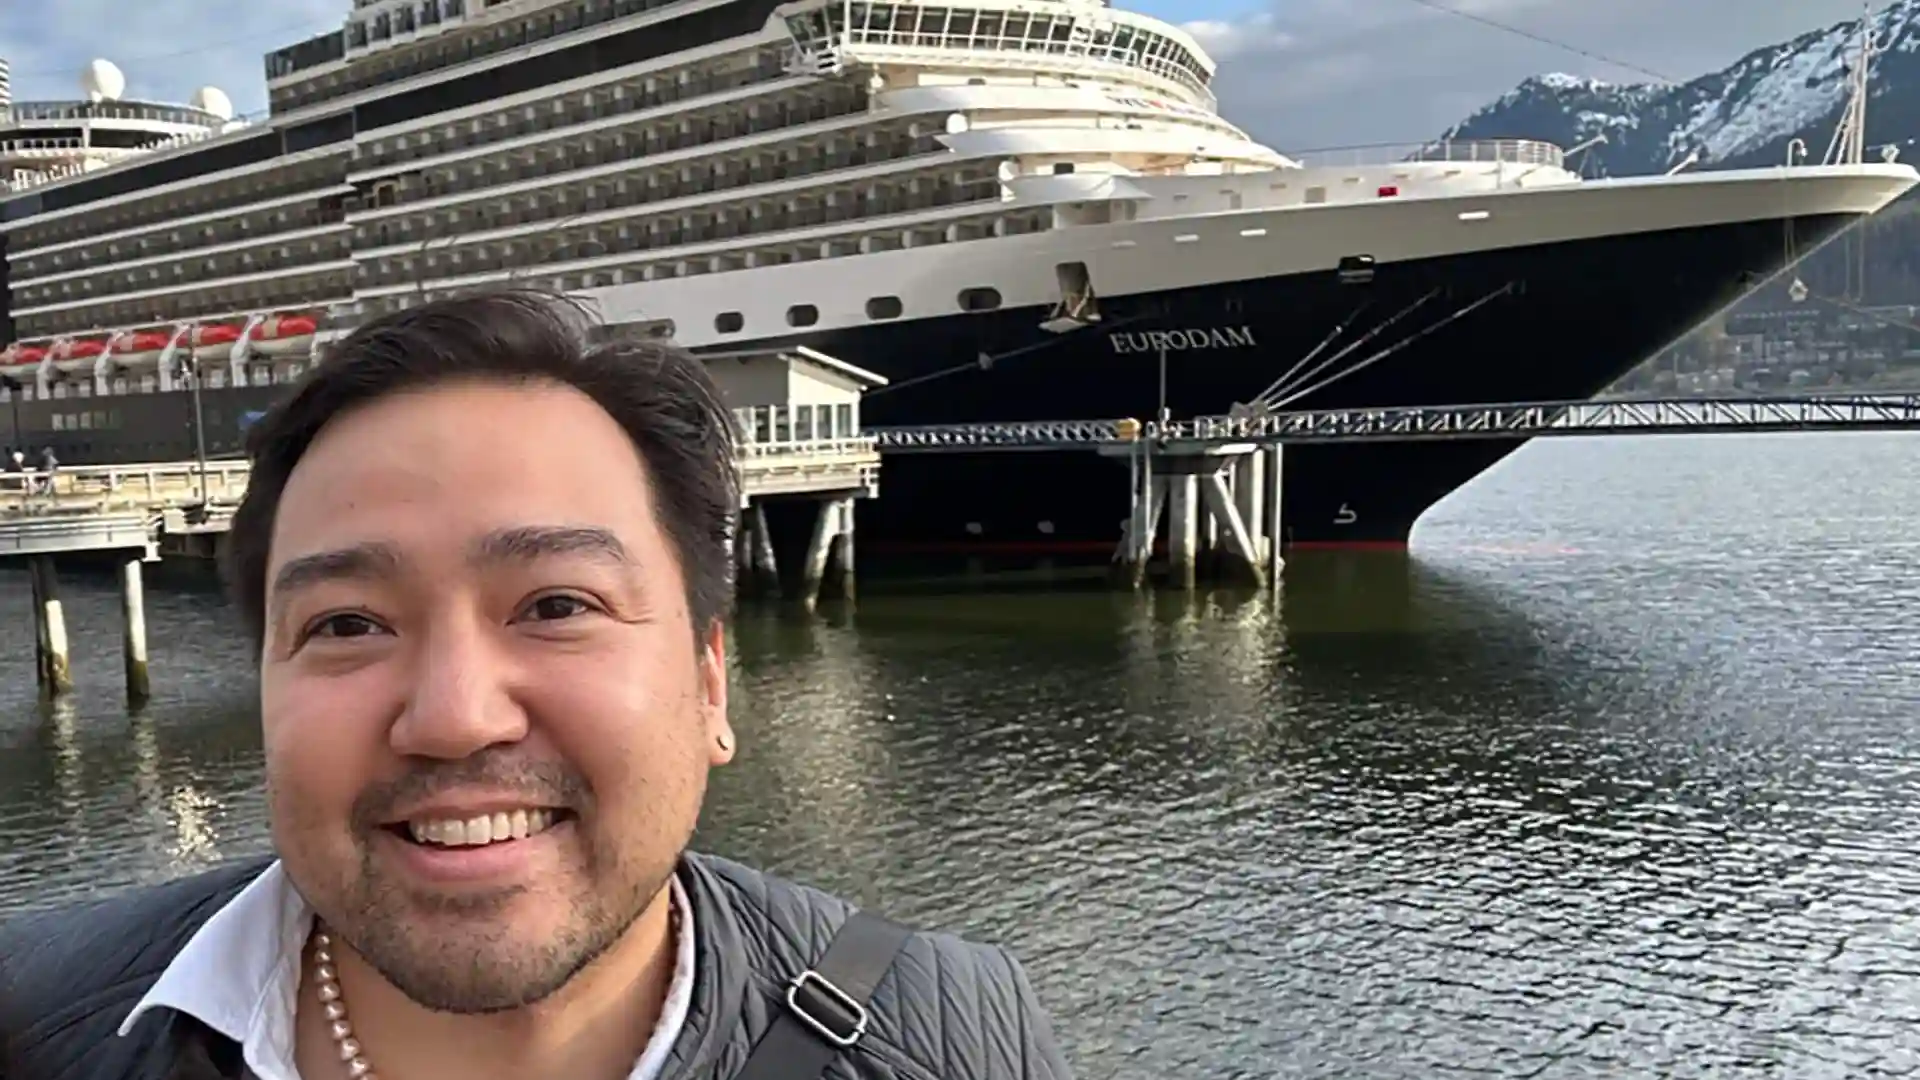 View of Rico Worl, Alaska Native artist, at Port of Juneau, with Holland America Line cruise ship in background.